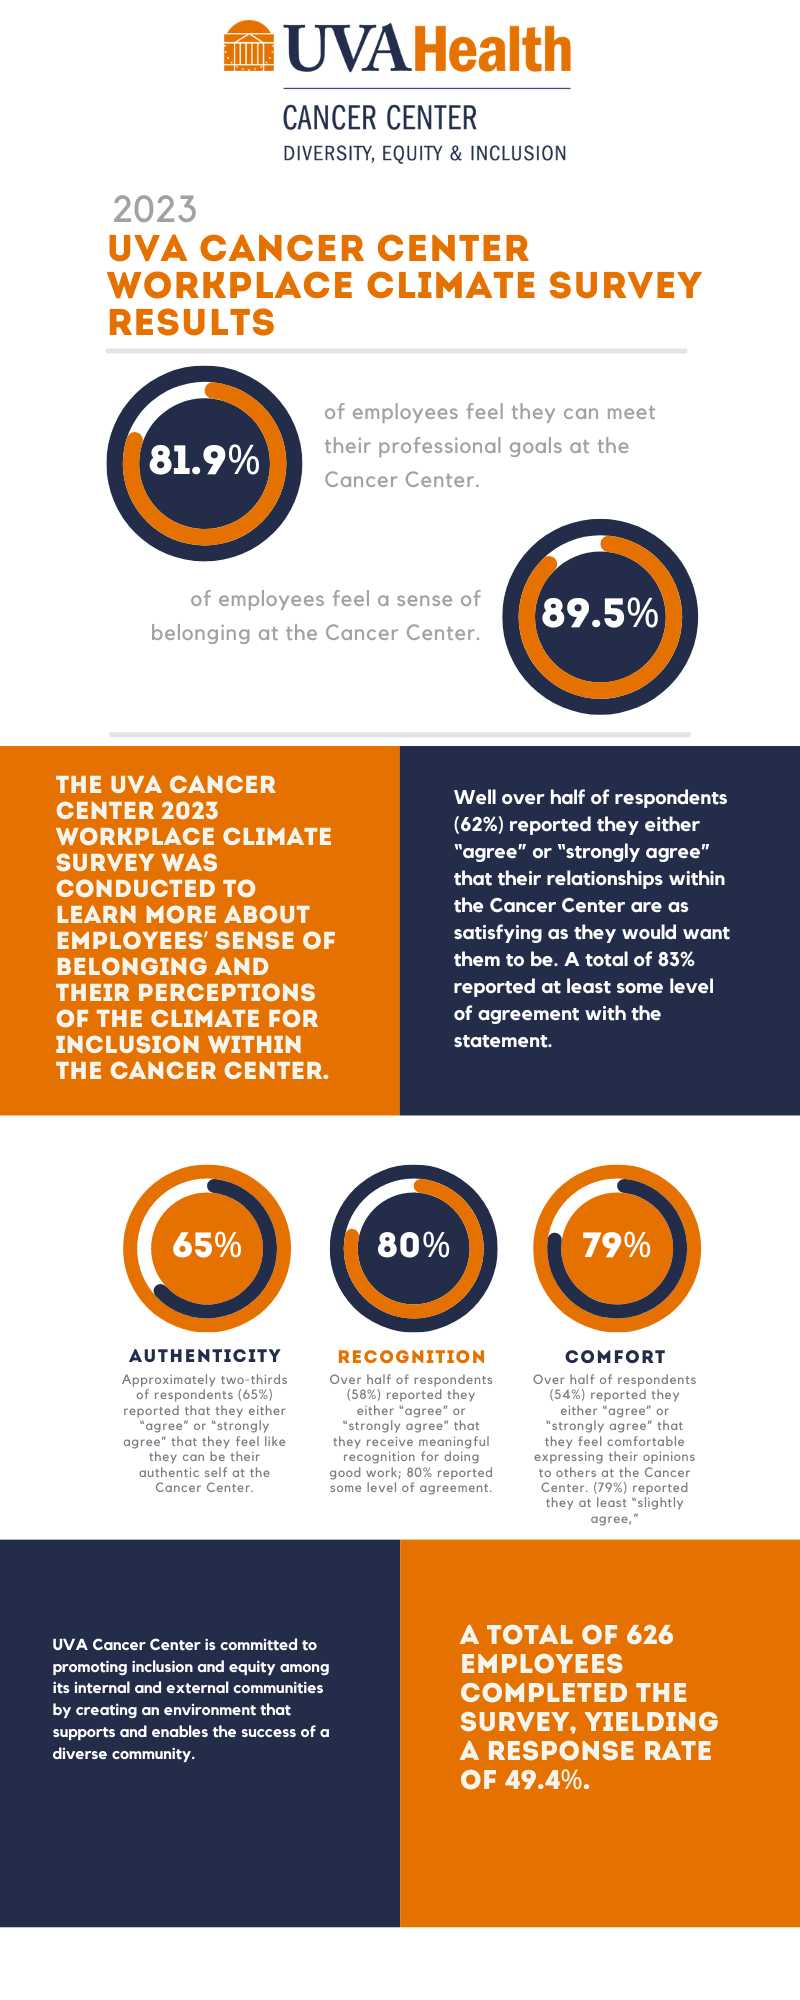 An infographic in UVA blue, orange and white, titled “2023 UVA Cancer Center Workplace Climate Survey Results,” displays the following data and text: 89.9% of employees feel they can meet their professional goals at the Cancer Center. 89.5% of employees feel a sense of belonging at the Cancer Center. The UVA Cancer Center 2023 Workplace Climate Survey was conducted to learn more about employees’ sense of belonging and their perceptions of the climate for inclusion within the Cancer Center. Well over half of respondents (62%) reported they either “agree” or “strongly agree” that their relationships within the Cancer Center are as satisfying as they would want them to be. A total of 83% reported at least some level of agreement with the statement. Authenticity: Approximately two-thirds of respondents (65%) reported that they either “agree” or “strongly agree” that they feel like they can be their authentic self at the Cancer Center. Recognition: Over half of respondents (58%) reported they either “agree” or “strongly agree” that they receive meaningful recognition for doing good work; 80% reported some level of agreement. Comfort: Over half of respondents (54%) reported they either “agree” or “strongly agree” that they feel comfortable expressing their opinions to others at the Cancer Center. (79%) reported they at least “slightly agree.” UVA Cancer Center is committed to promoting inclusion and equity among its internal and external communities by creating an environment that supports and enables the success of a diverse community. A total of 626 employees completed the survey, yielding a response rate of 49.4%.